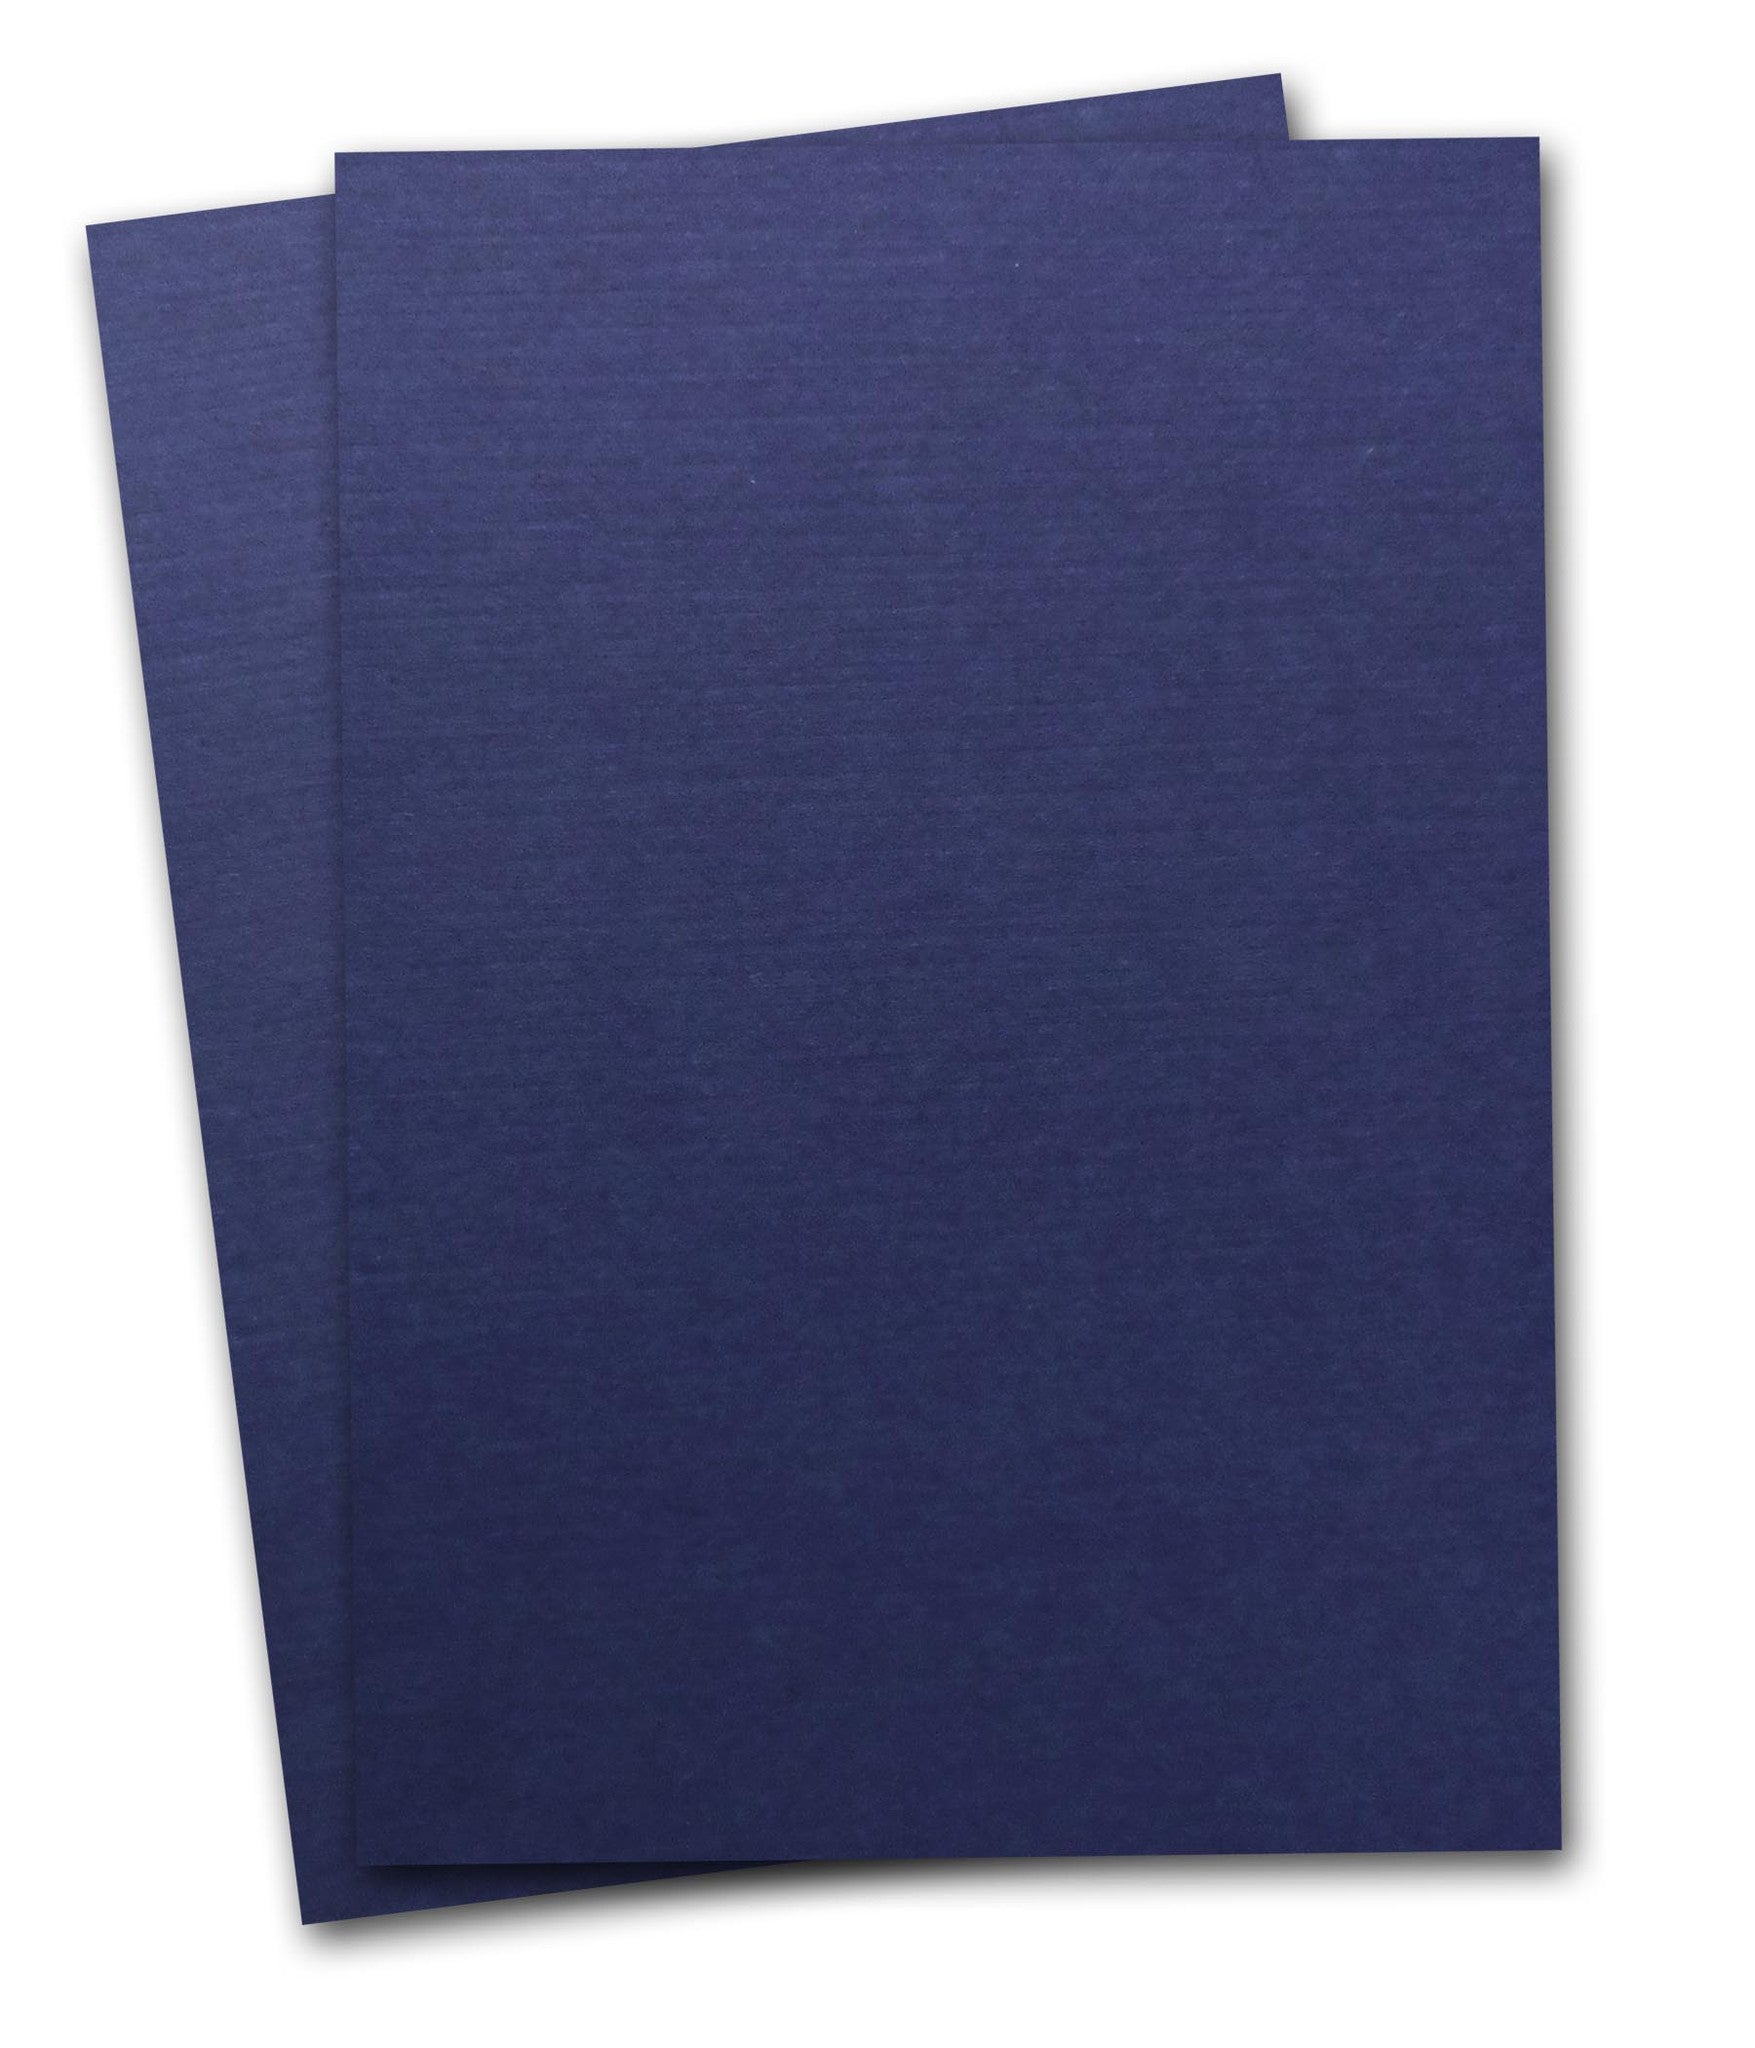 Gondiane 24 sheets Navy Blue Cardstock Paper 8.5 x 11 Inches for DIY Cards,  Invitations, Scrapbooking and Other Crafts(250gsm/92lb)